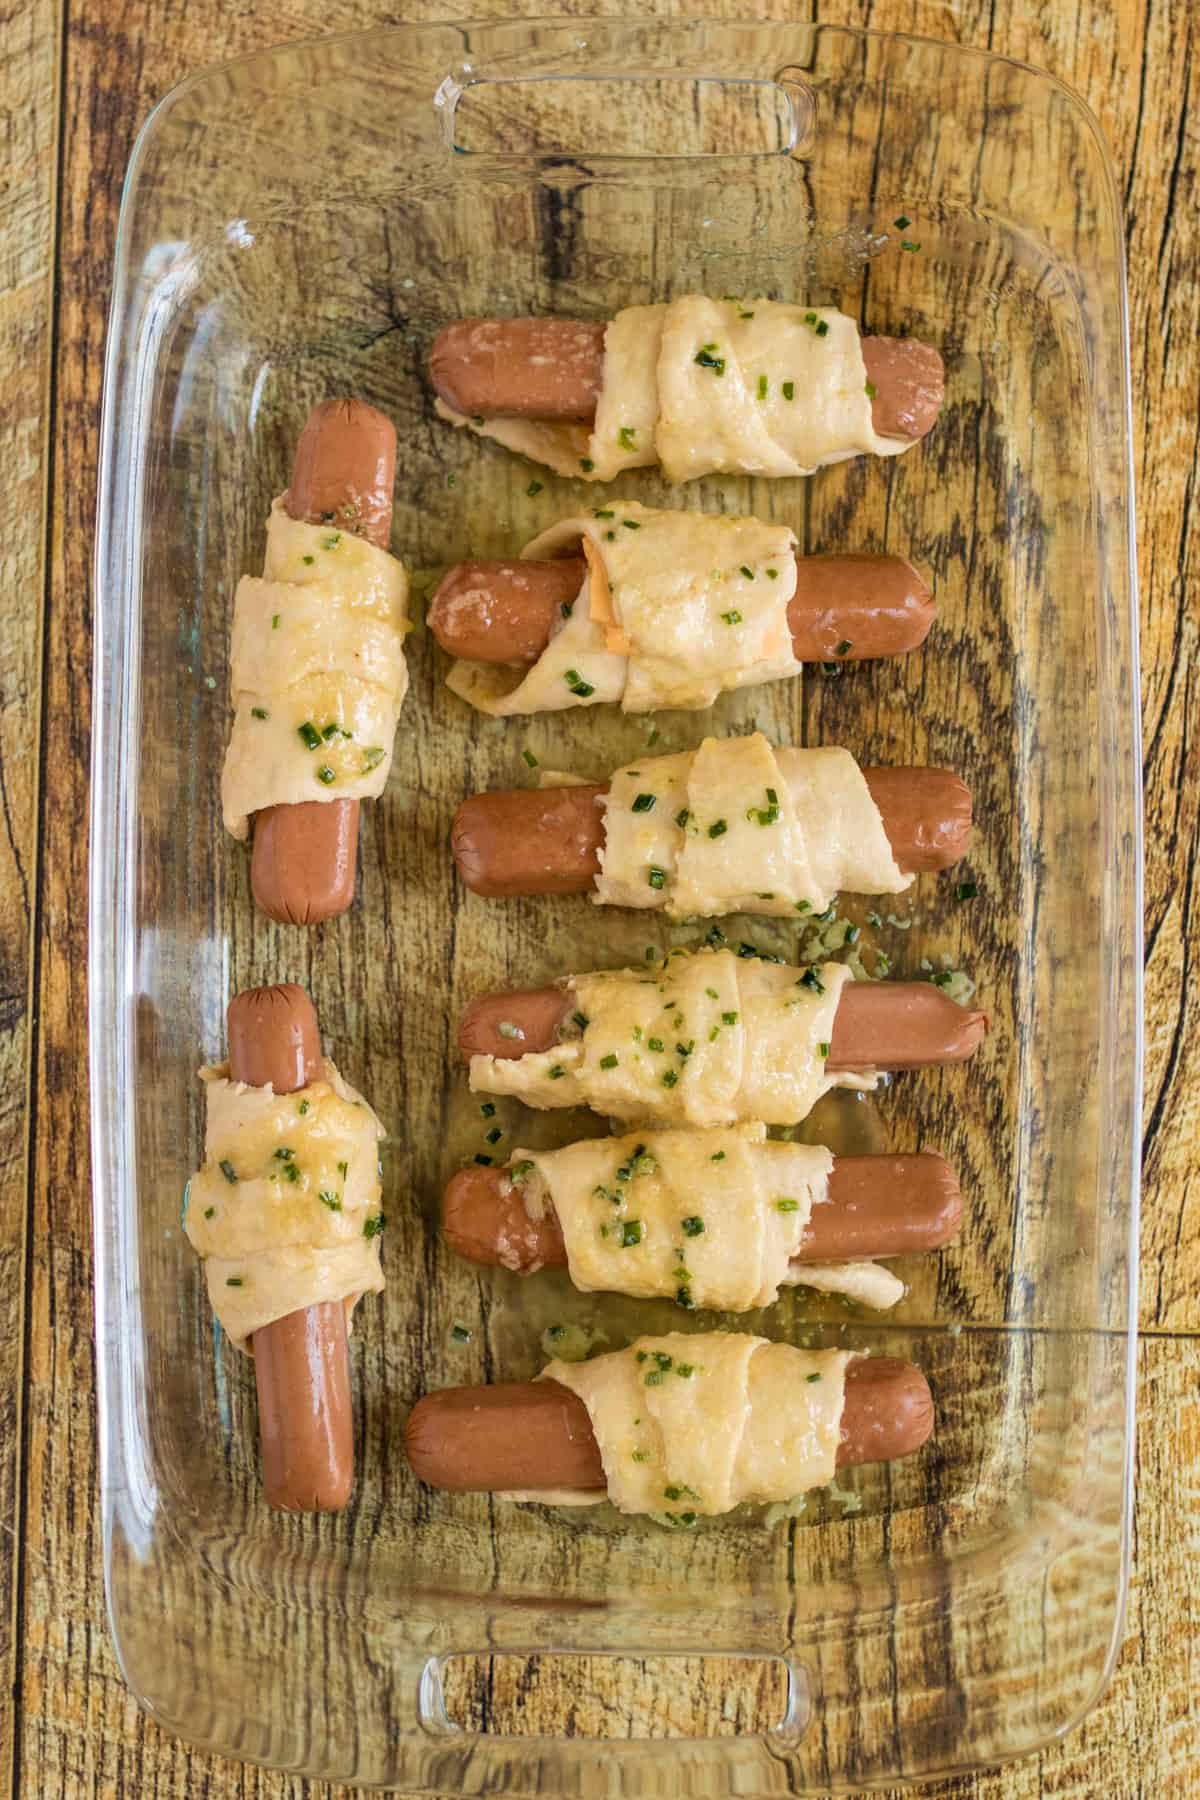 Unbaked crescent-wrapped hot dogs arranged in glass baking dish and topped with garlic and chive butter